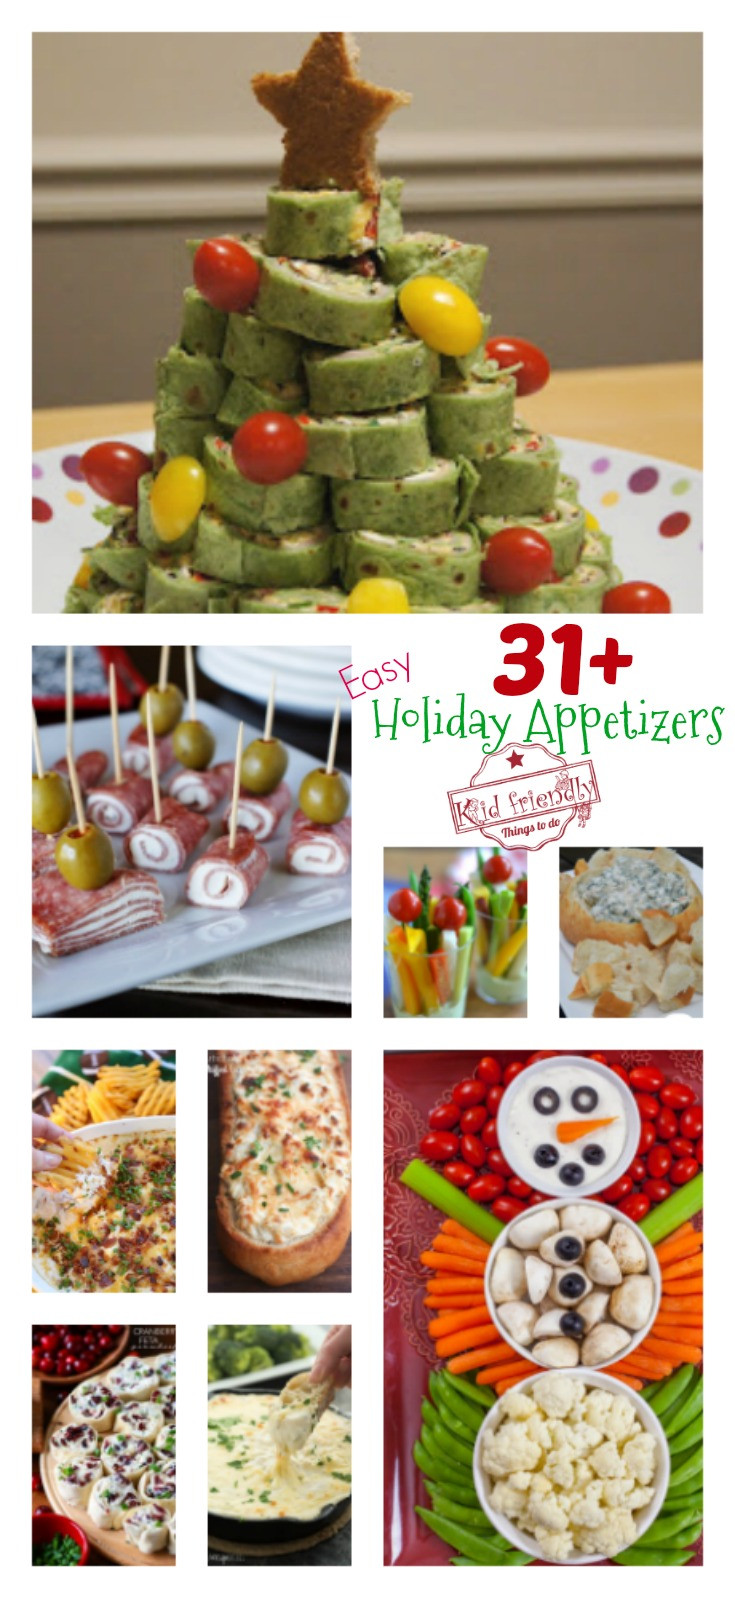 Food Ideas To Bring To A Party
 Over 31 Easy Holiday Appetizers to Make for Christmas New